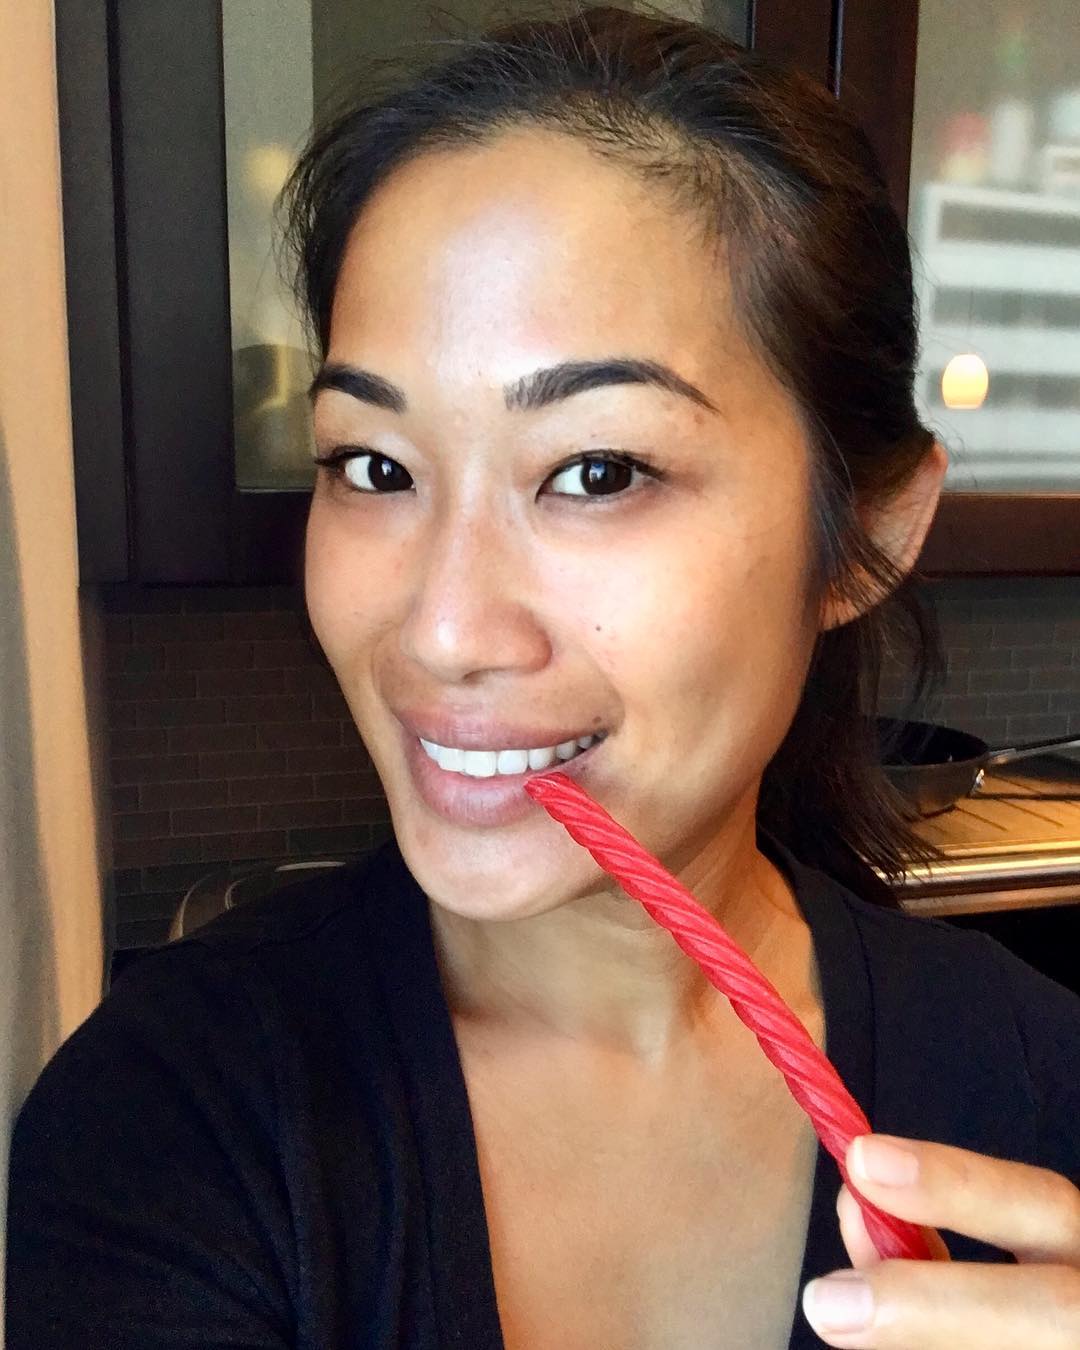 51 Hot Pictures Of Lena Yada Are Here To Fill Your Heart With Joy And Happiness 140